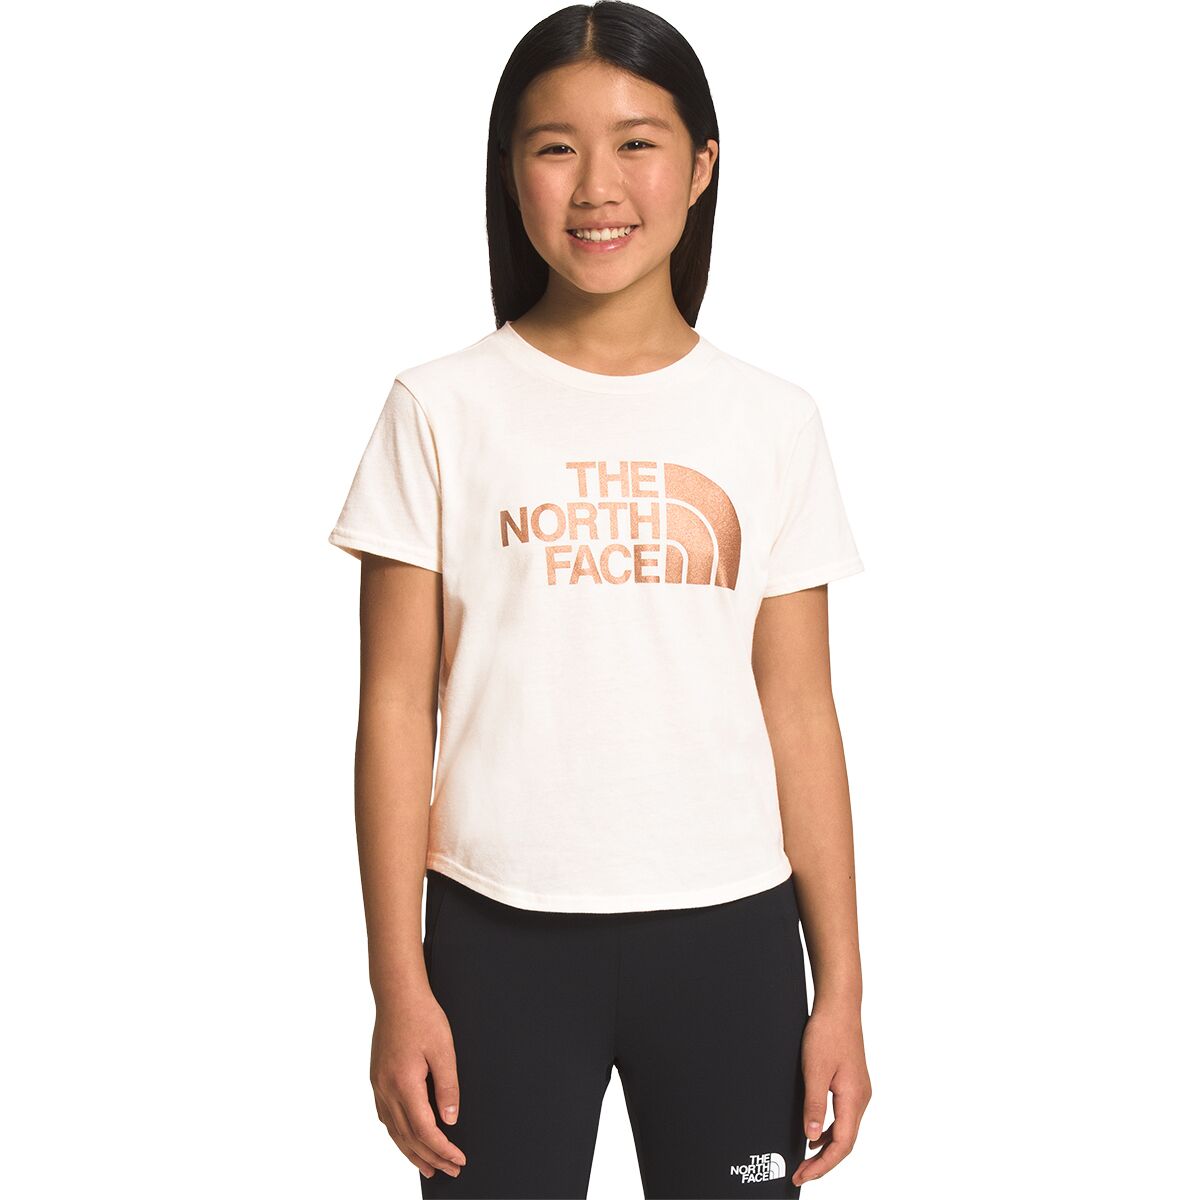 The Face Graphic Short-Sleeve - Girls'